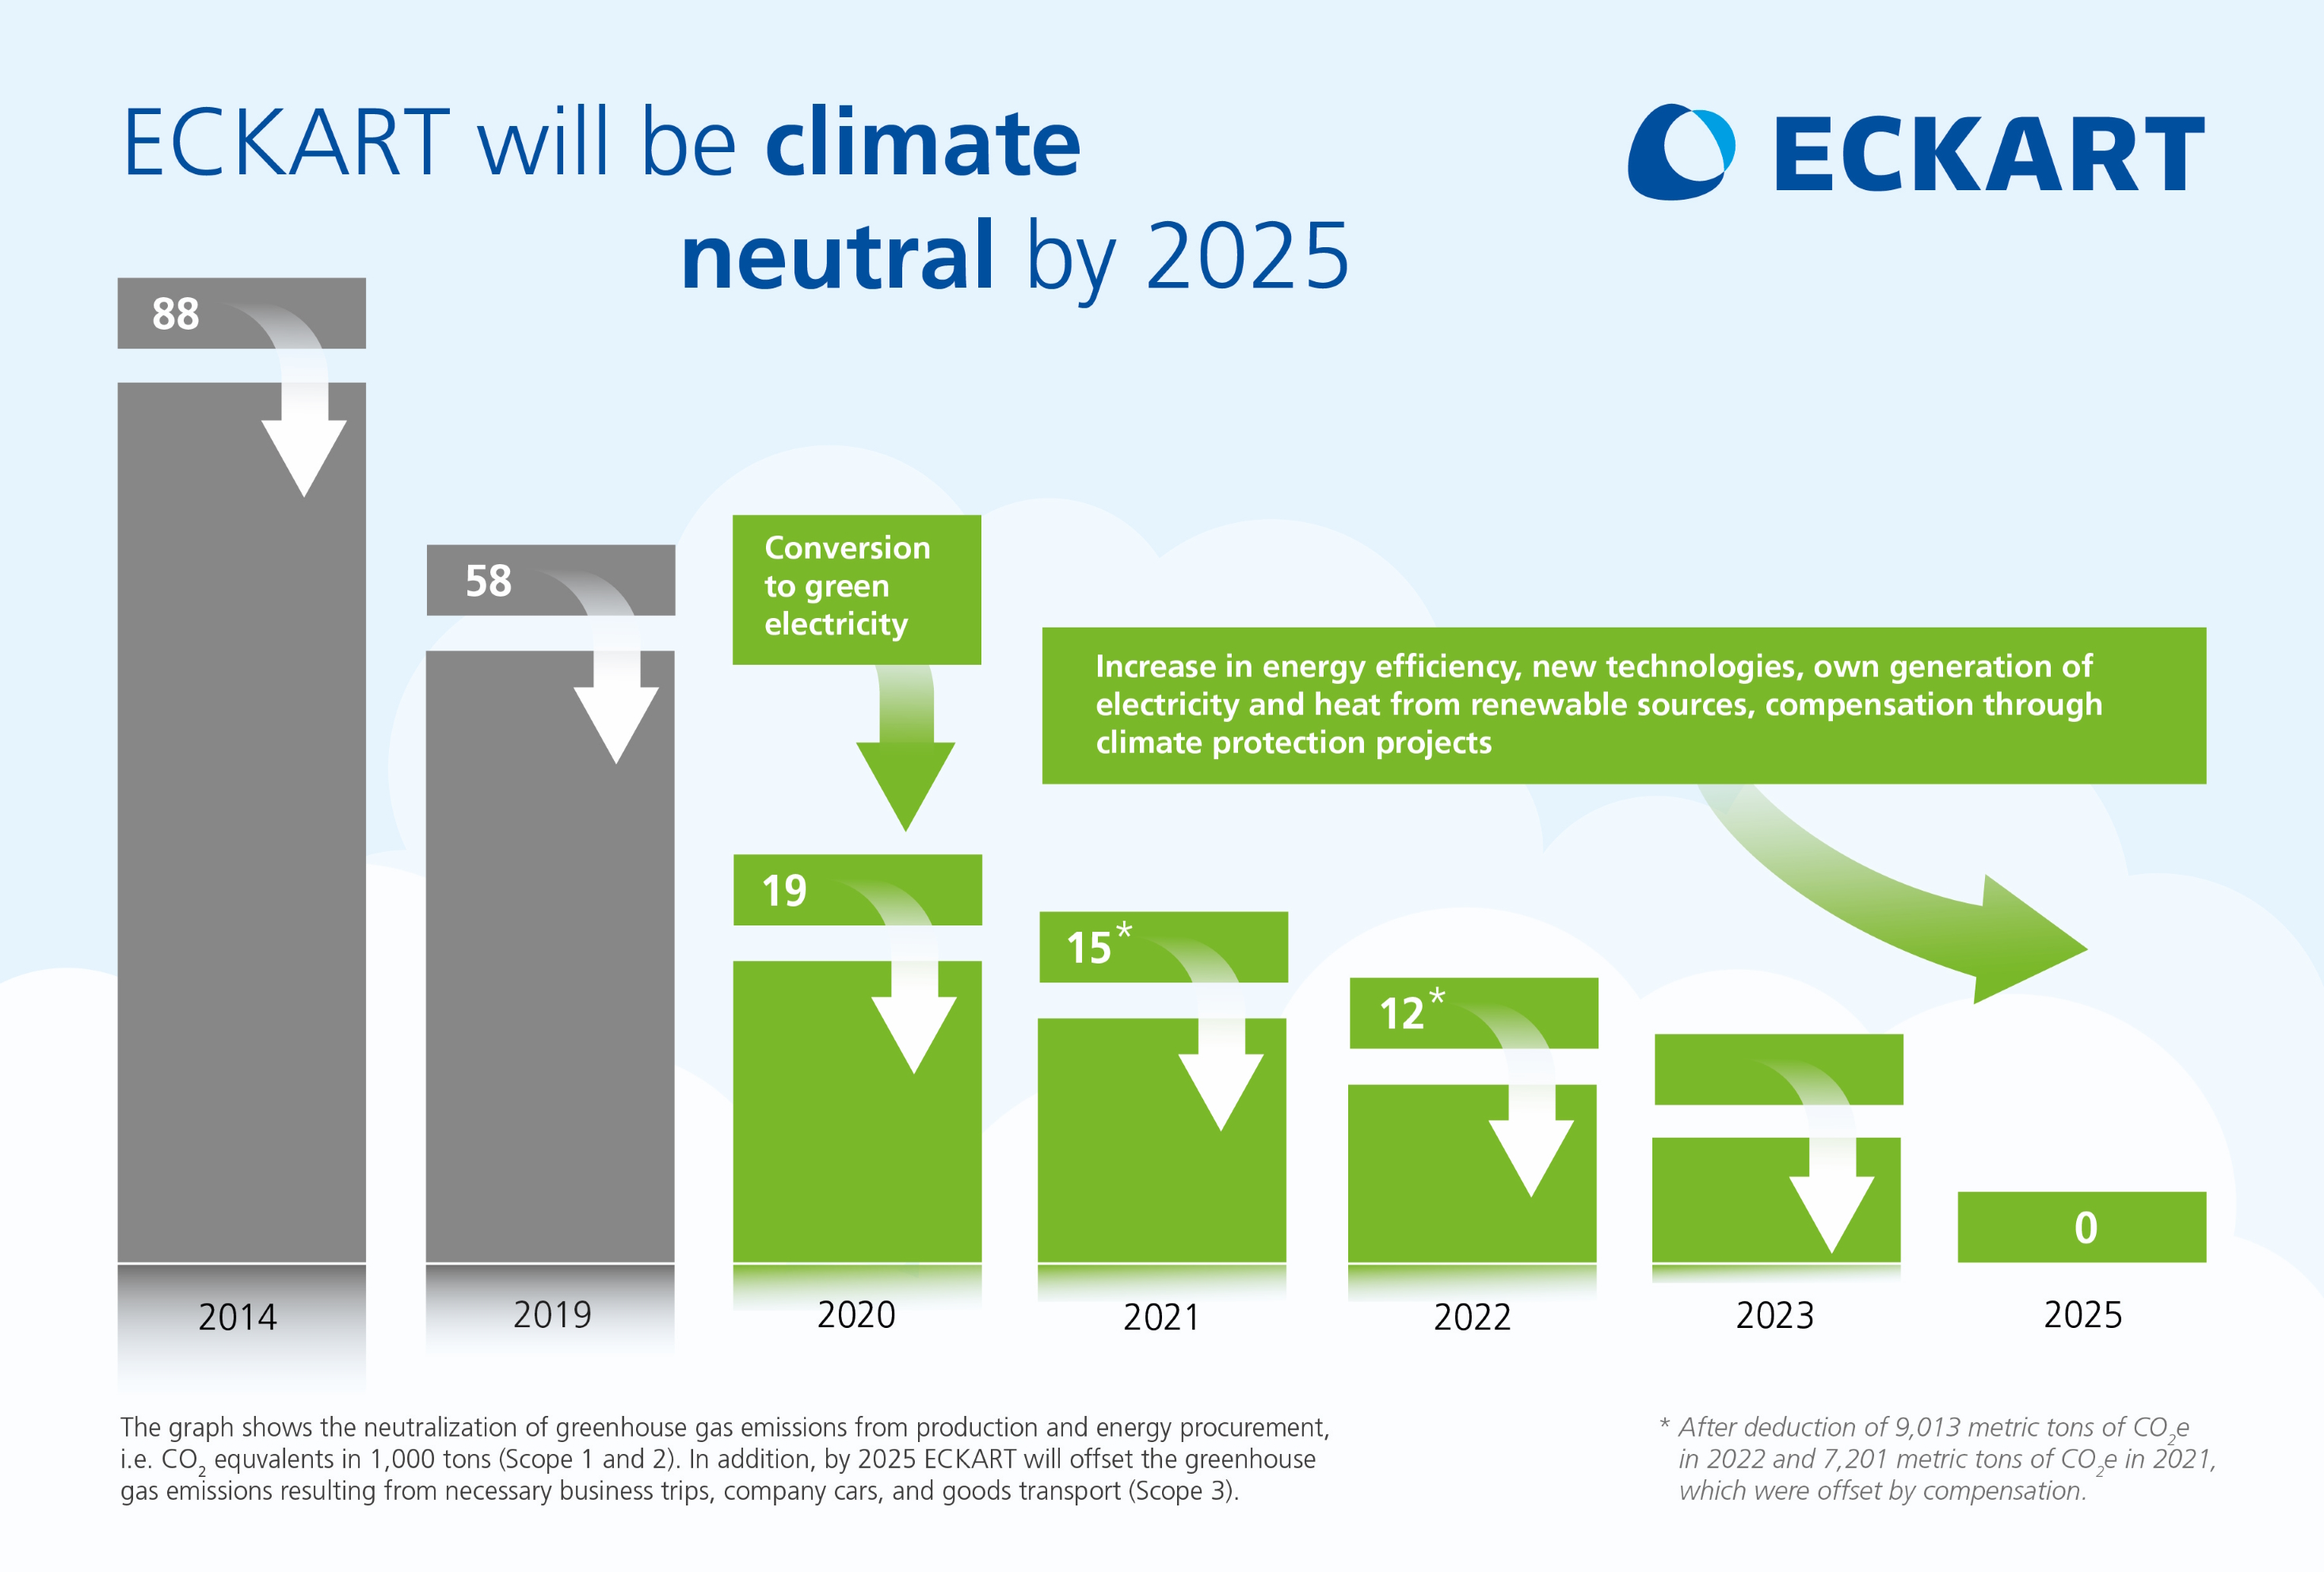 ECKART_will_be_climate_neutral_by_2025.jpg